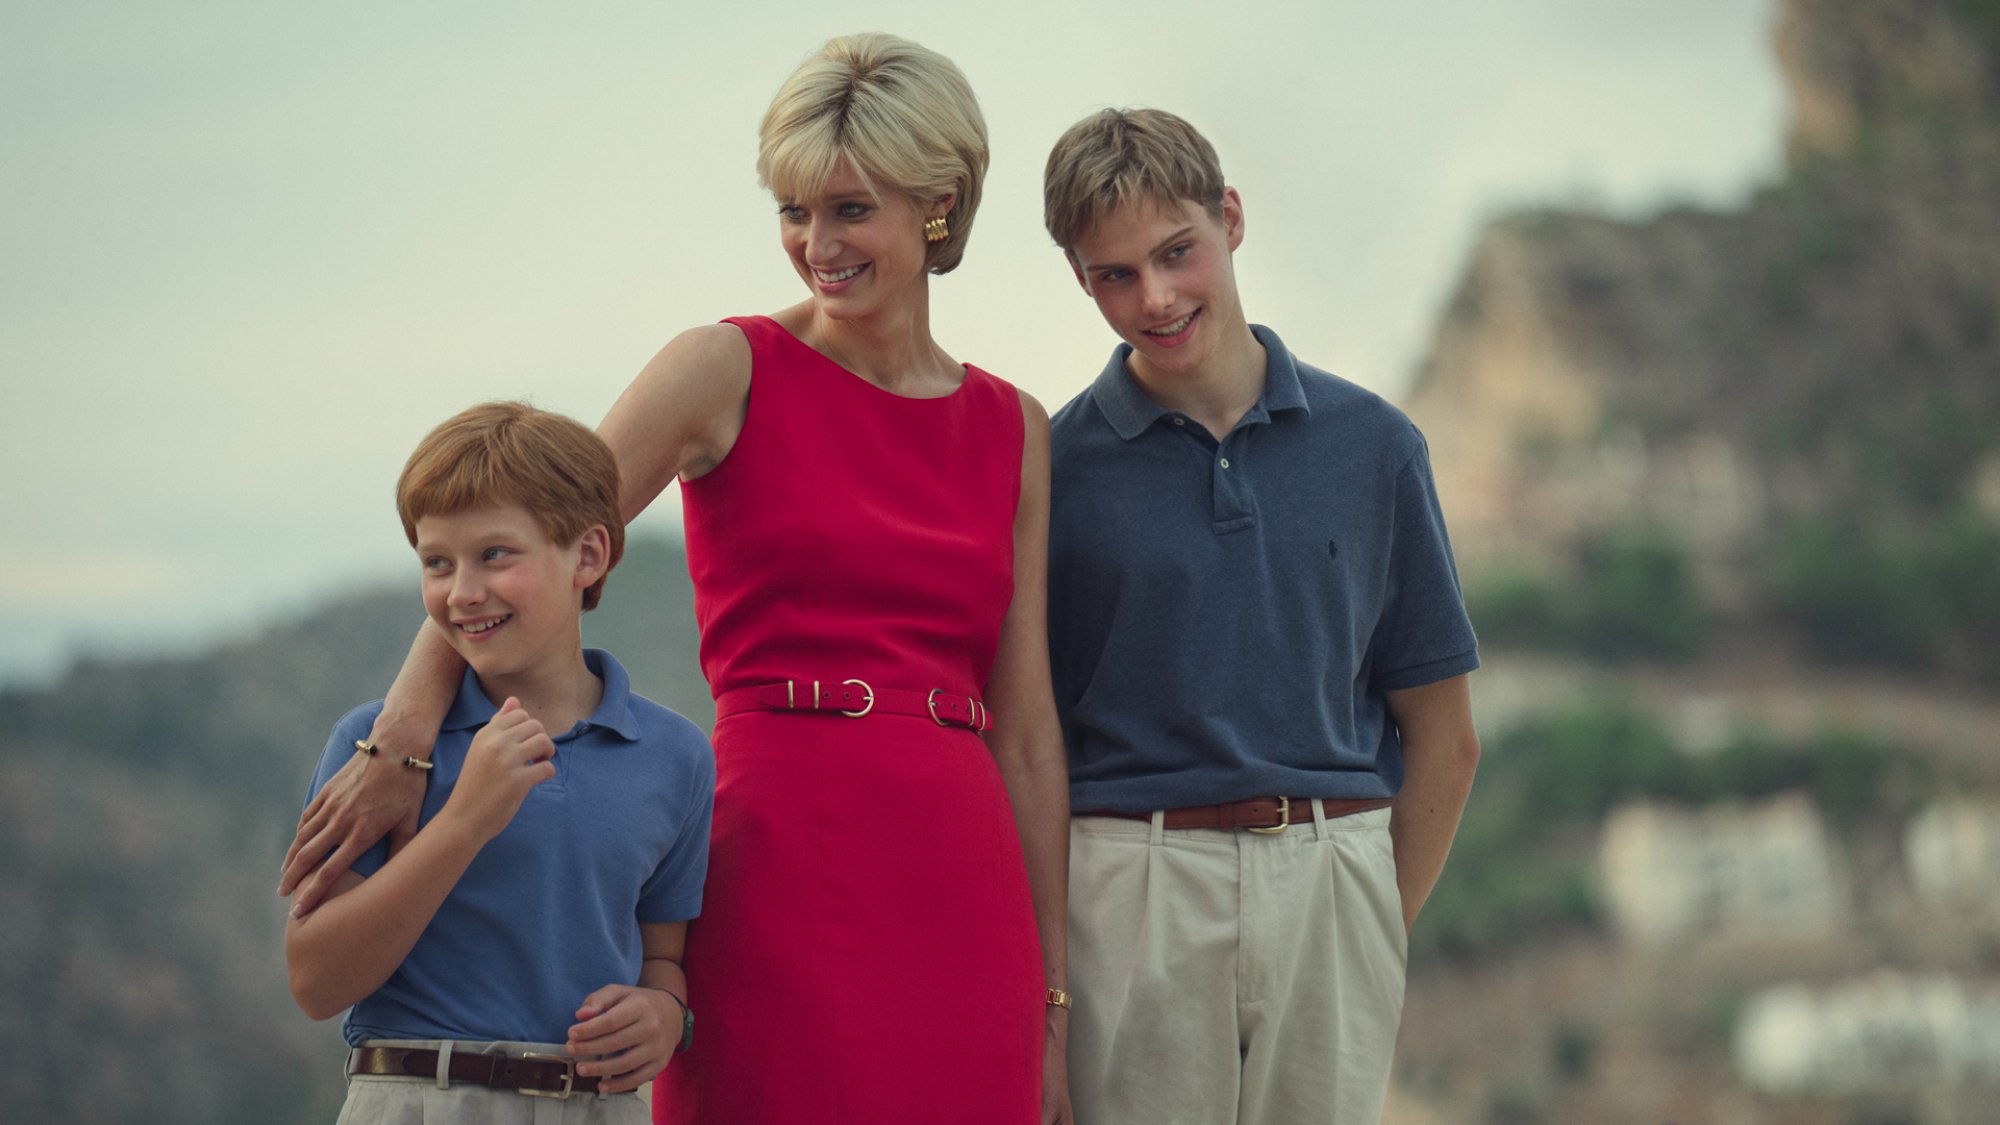 Prince Harry (Luther Ford), Princess Diana (Elizabeth Debicki), and Prince William (Ed McVey) stand together smiling in "The Crown"